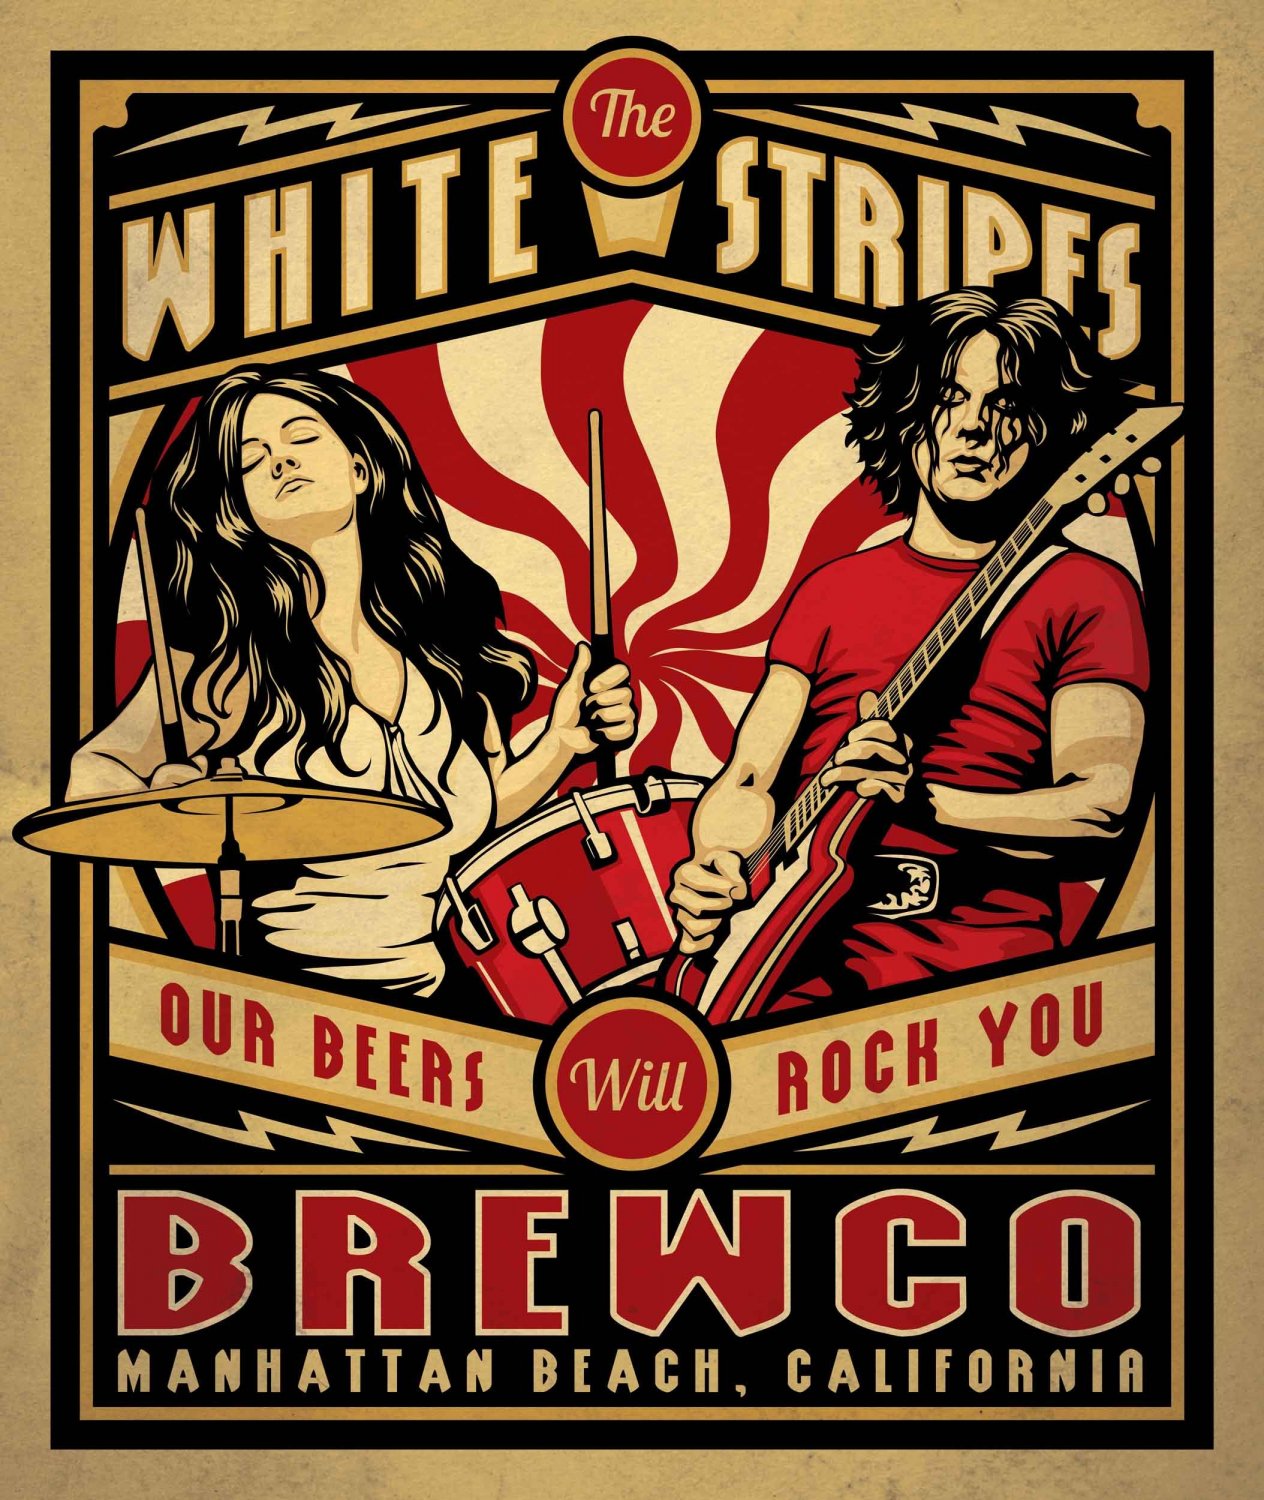 The White Stripes Our Beers Will Rock You Brewco Concert 18"x28" (45cm/70cm) Poster